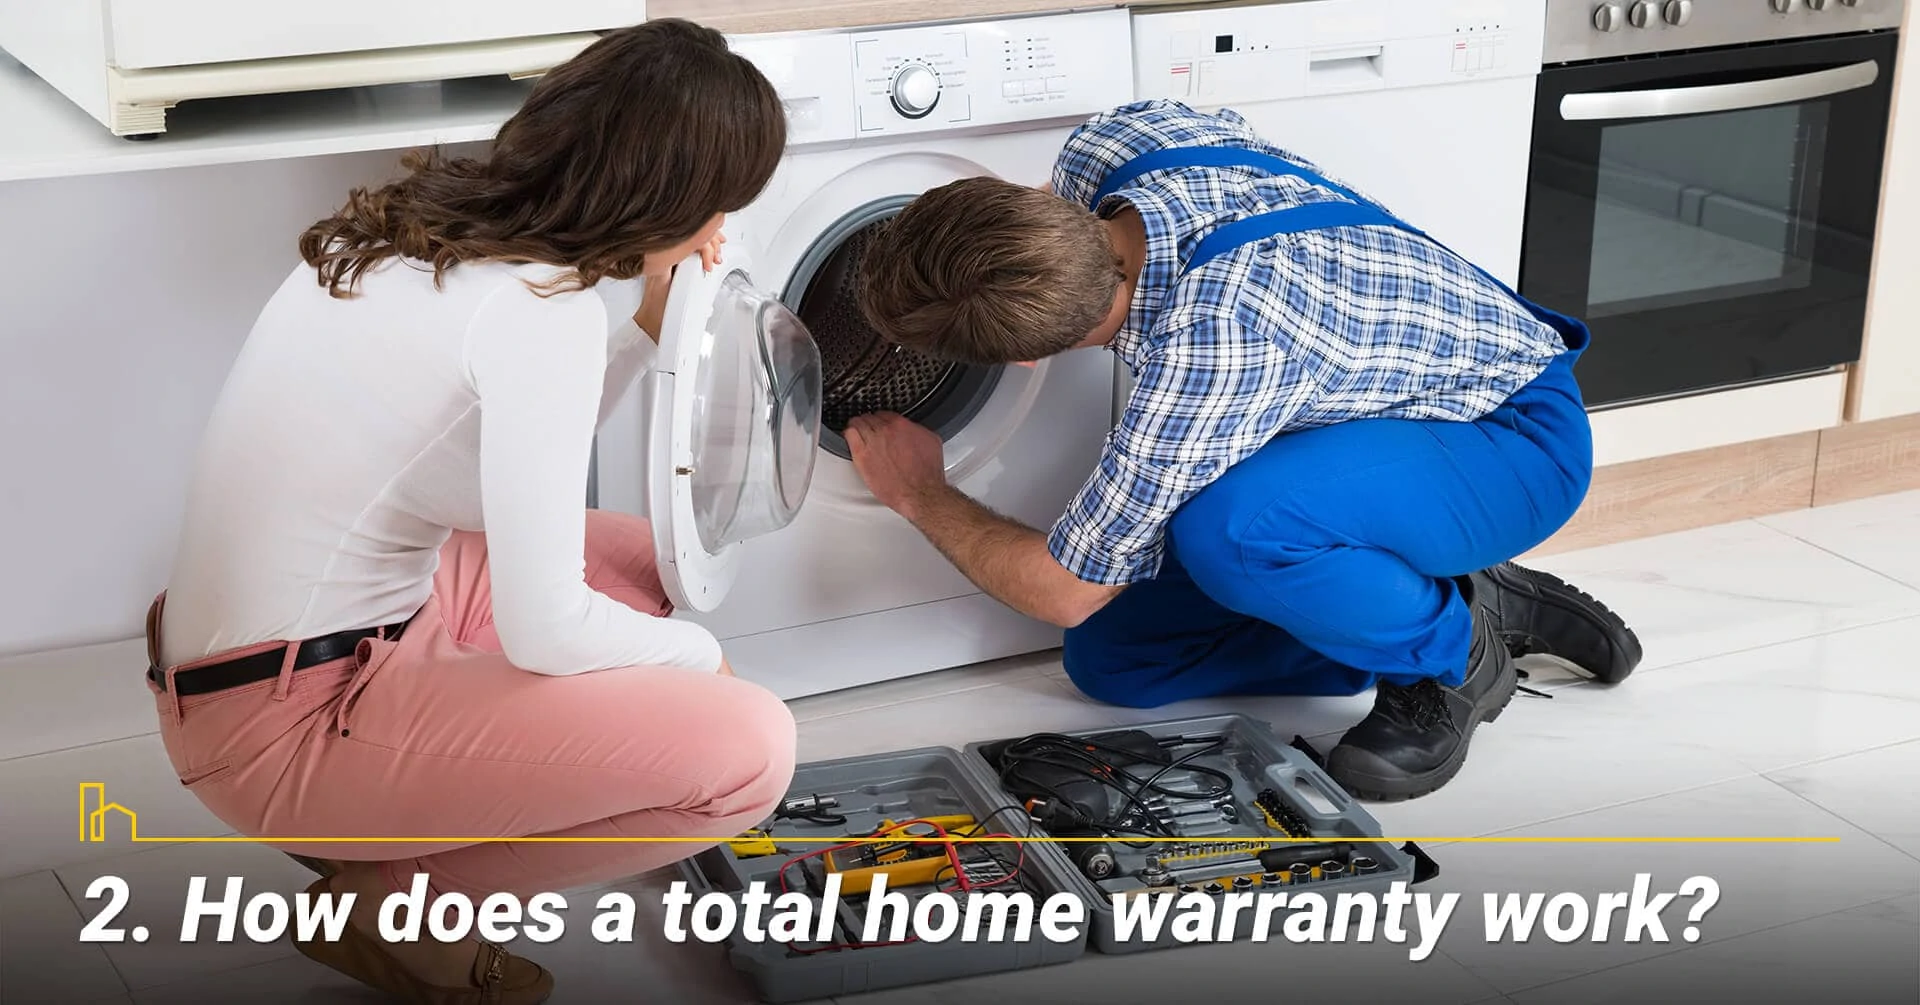 How does a total home warranty work? function of a total home warranty